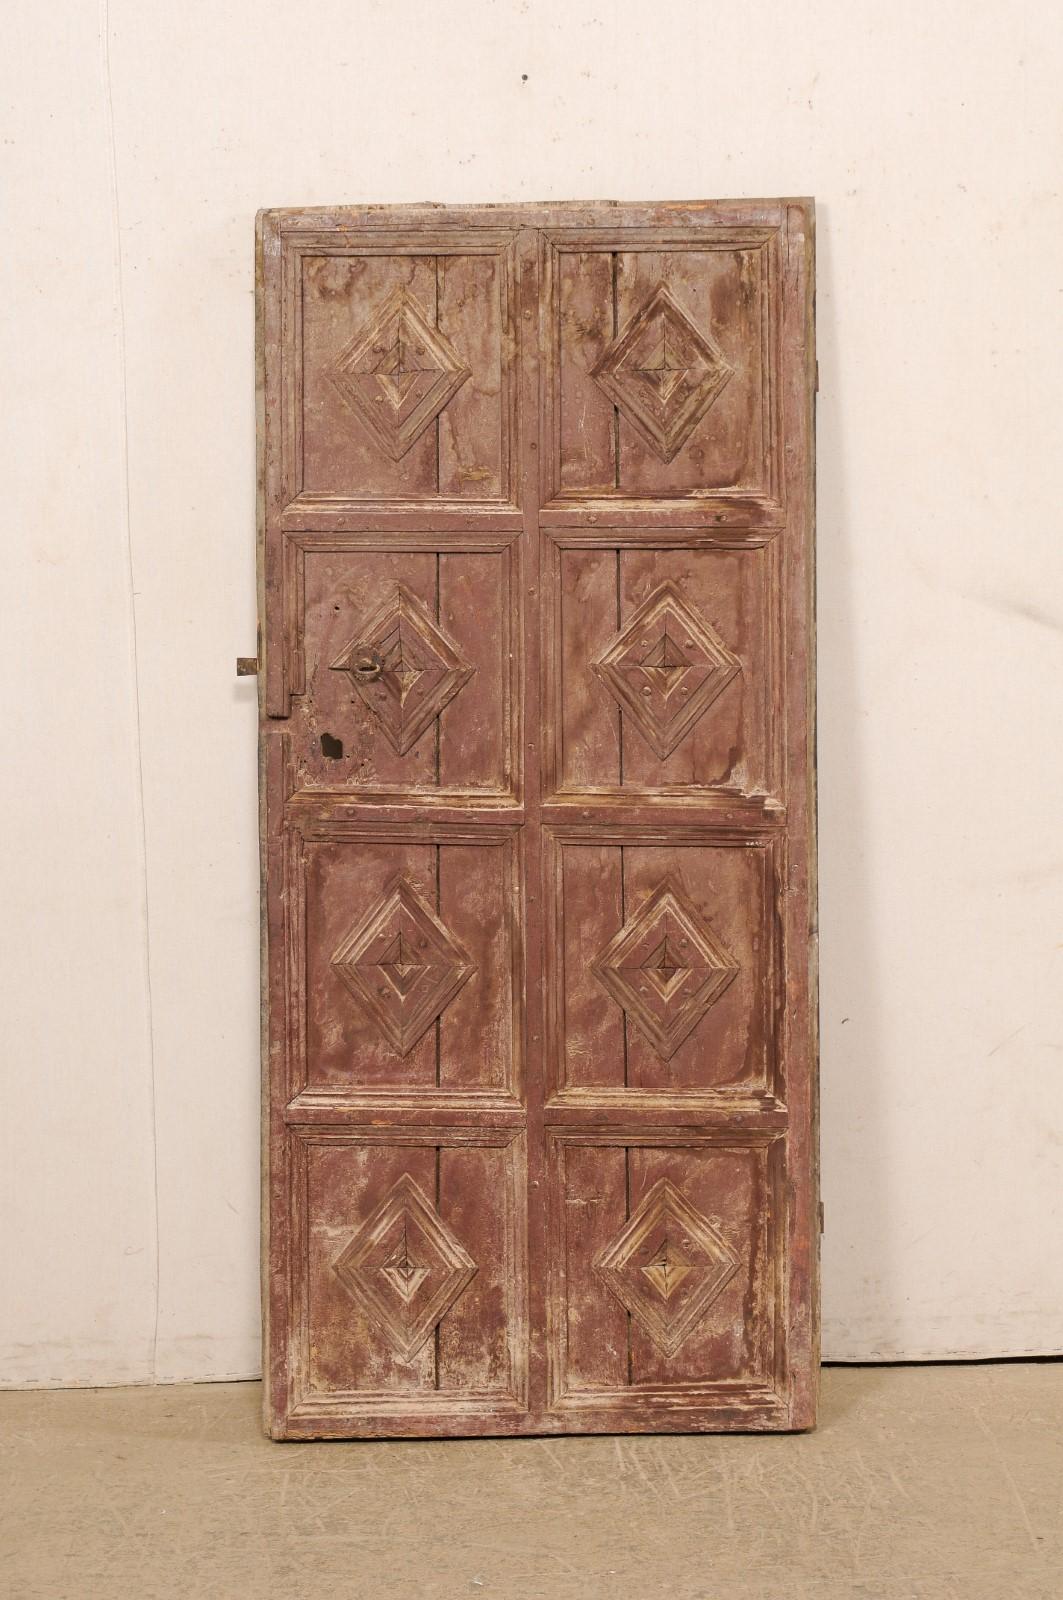 A Spanish painted eight panel wood door, with decorative diamond motif, from the 19th century. This beautifully-rustic antique door from Spain has been designed with eight squared raised panels, each embellished with raised diamond patterns within